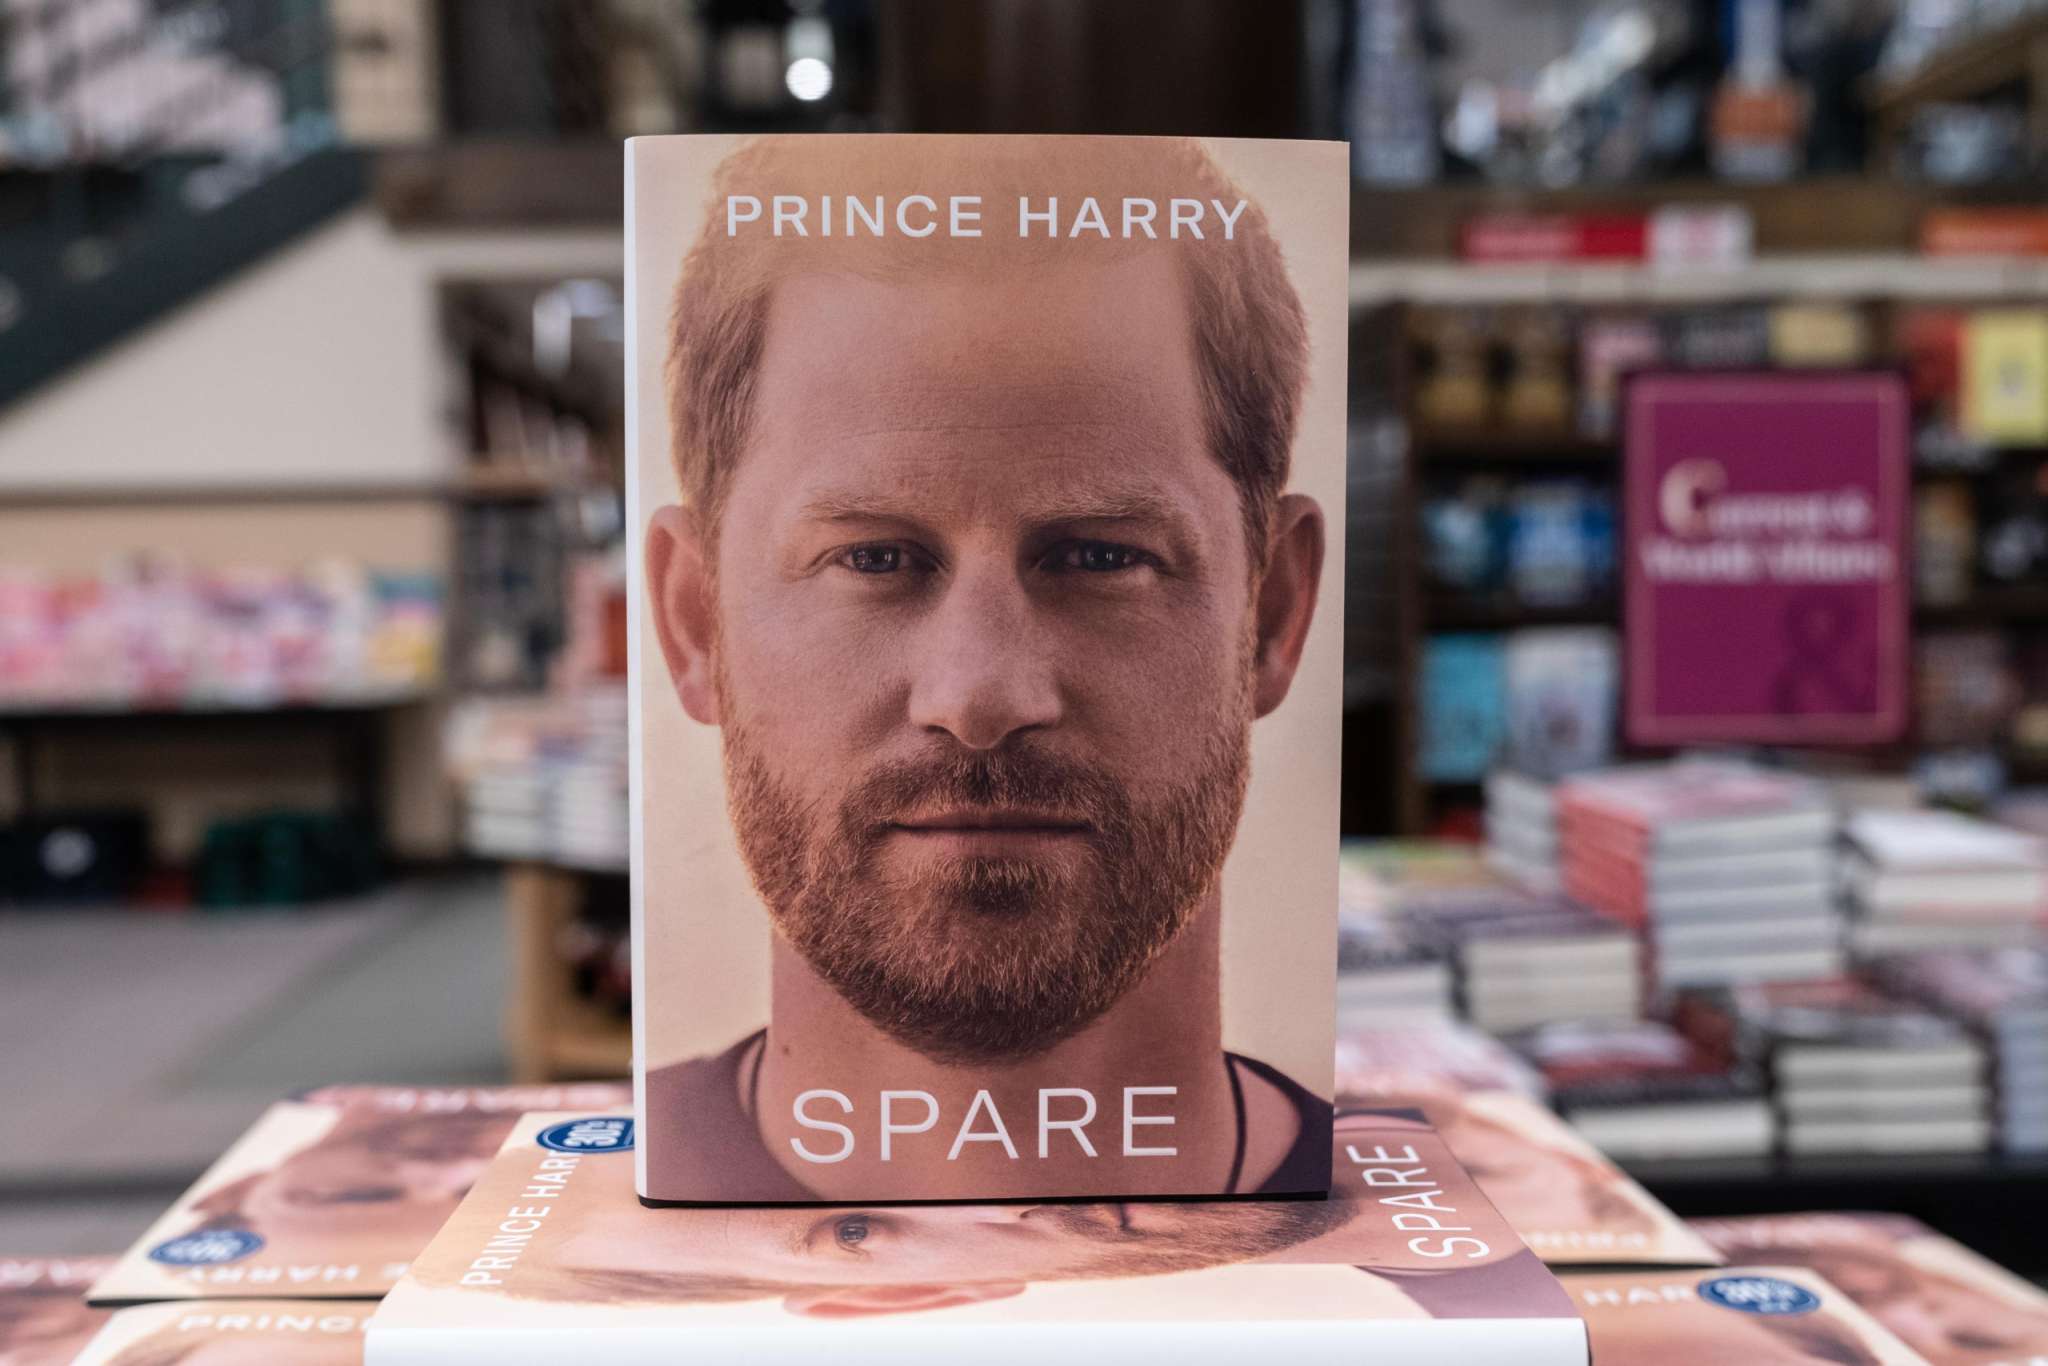 Spare by prince harry.